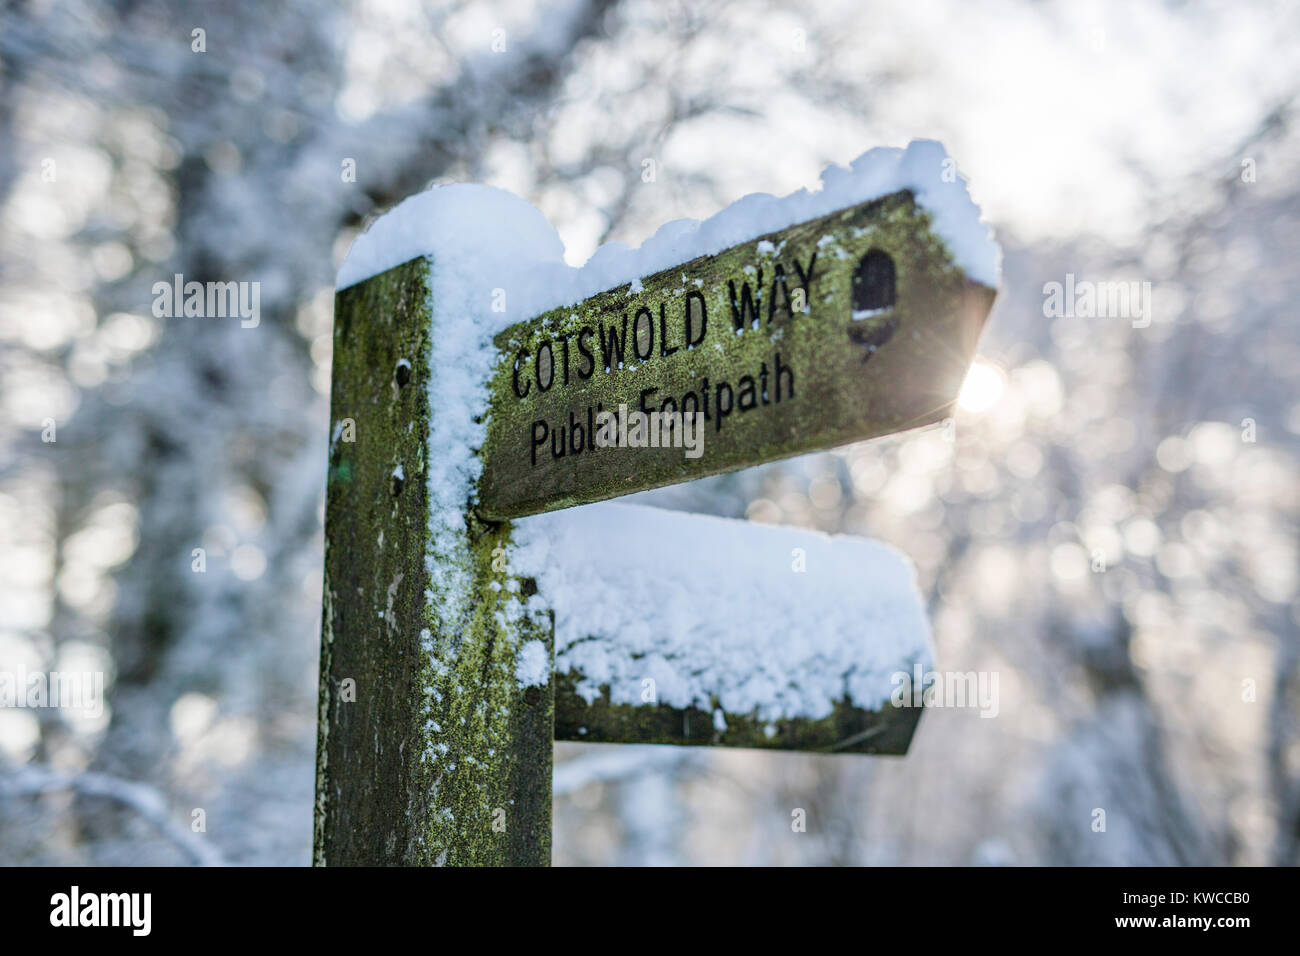 Cotswold Way National Trail finger post covered in snow, Crickley Hill, Gloucestershire, UK Stock Photo